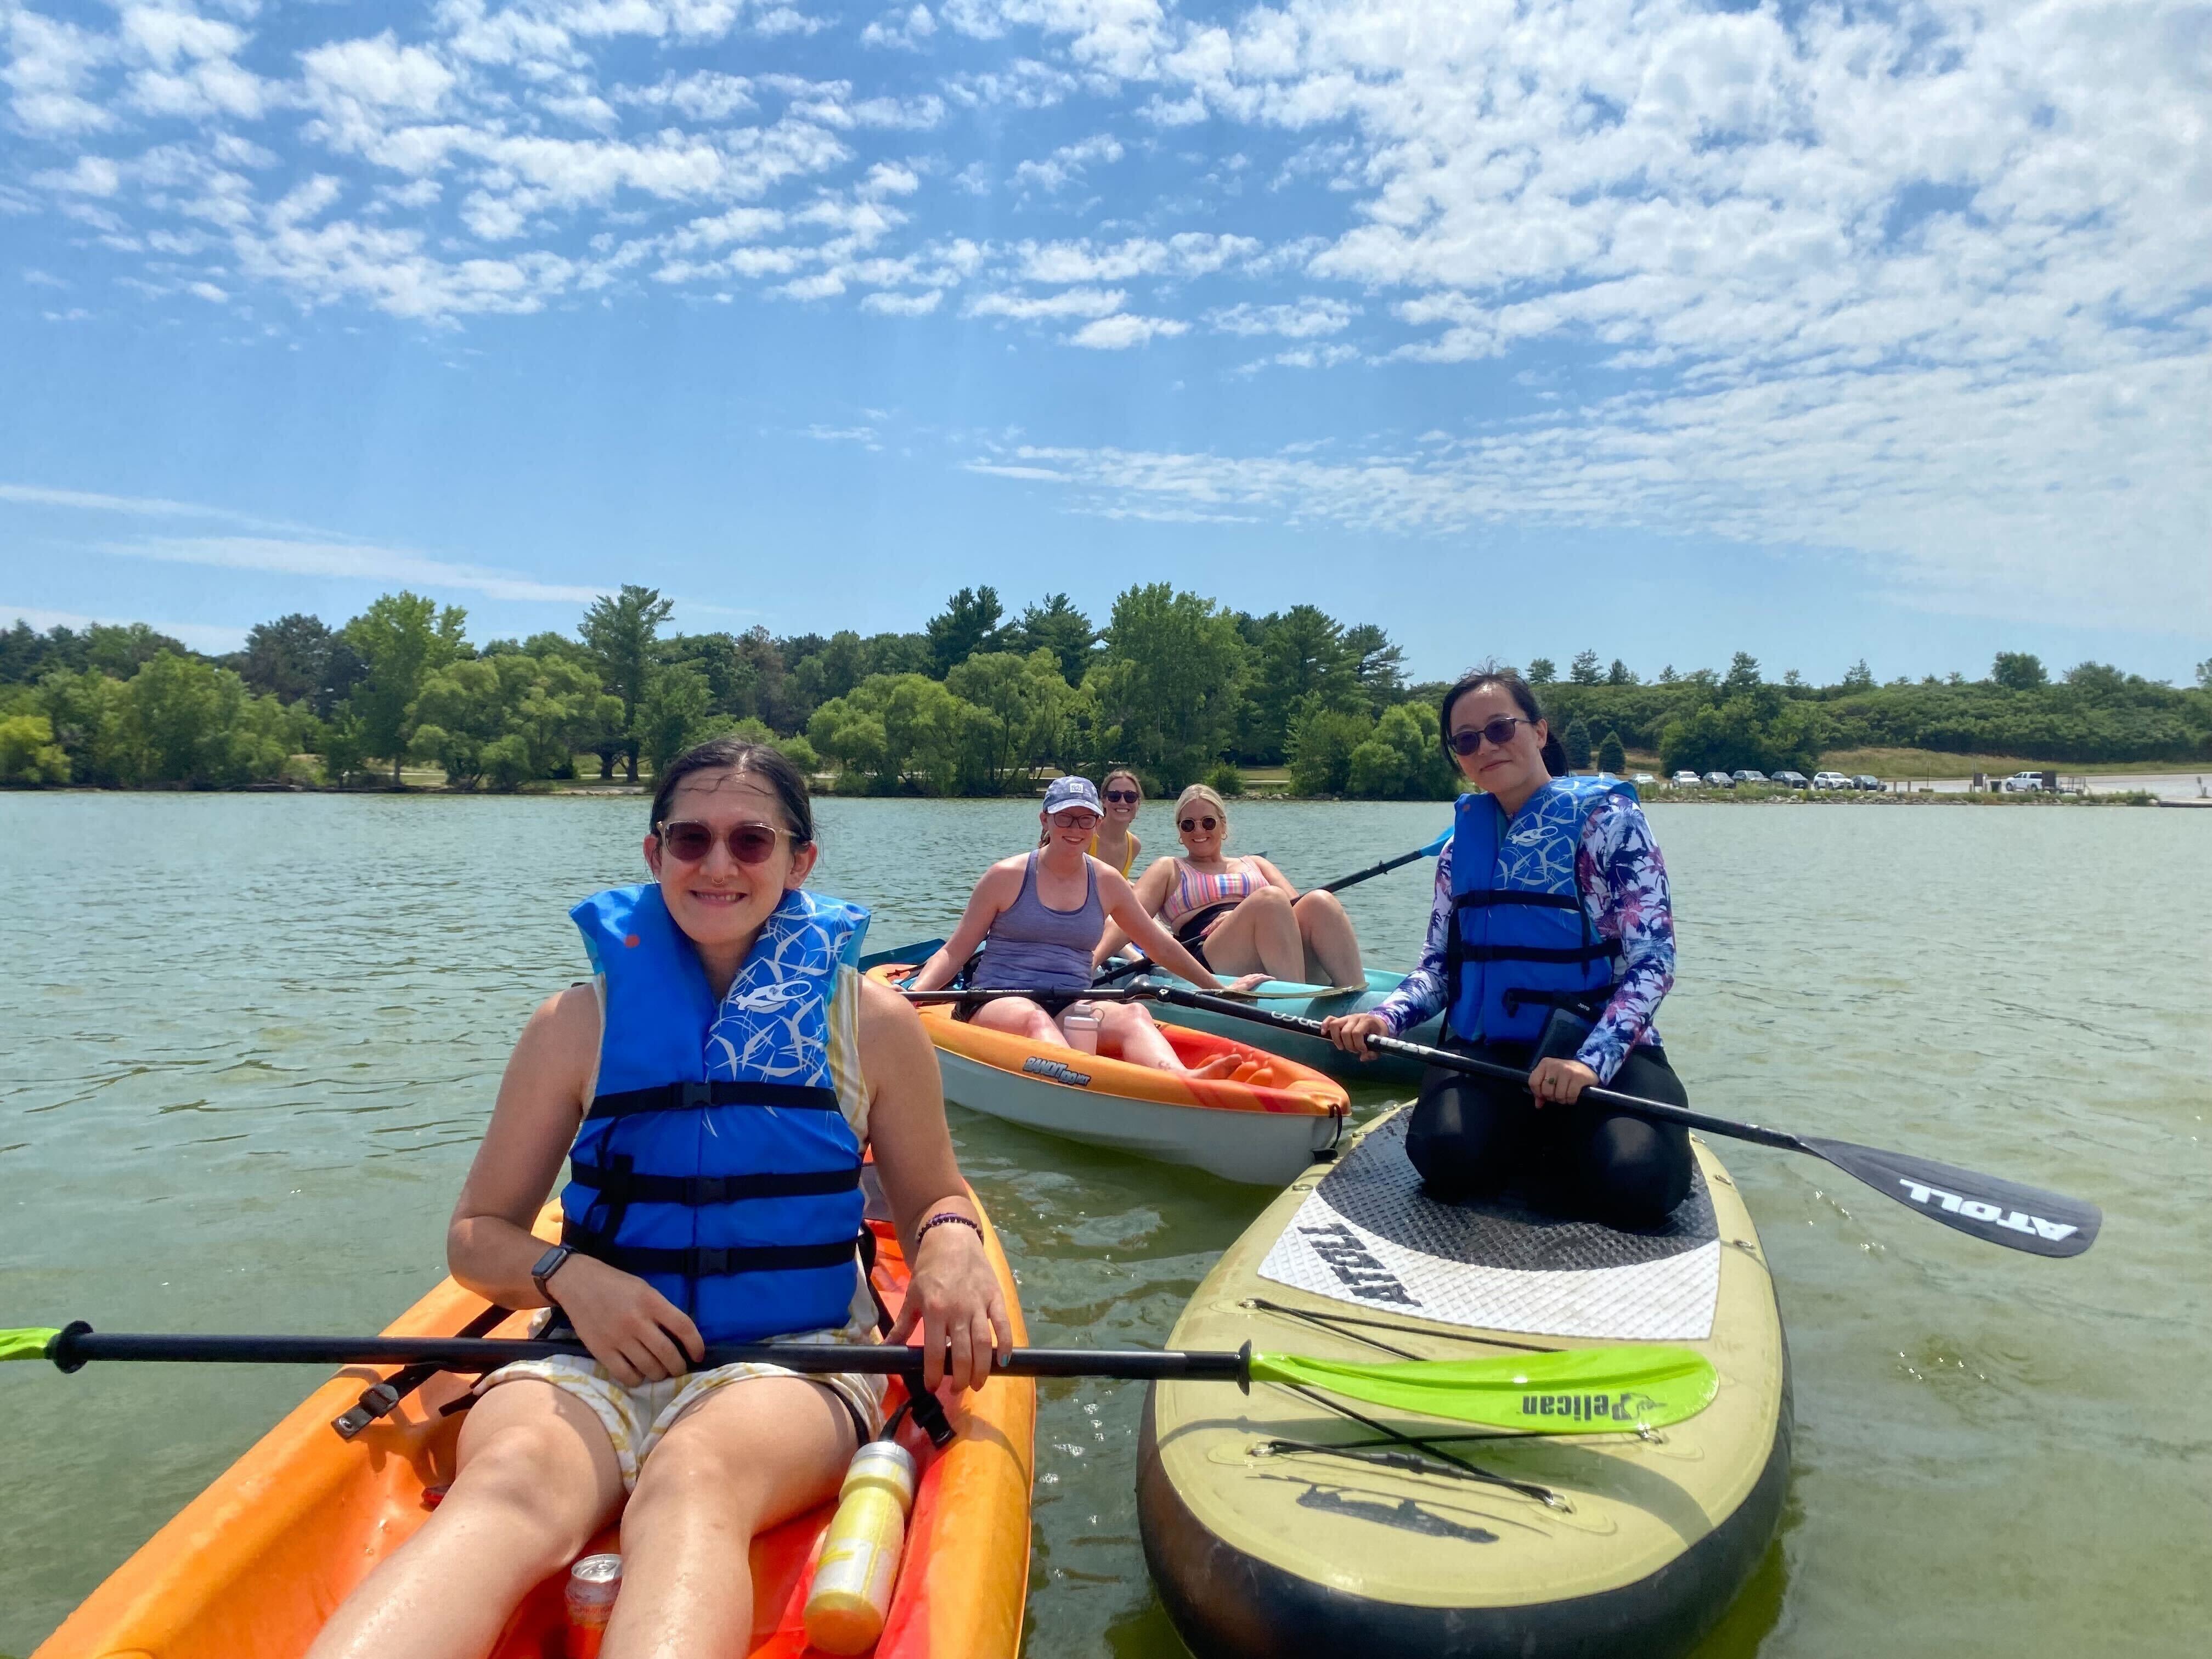 Team members pose for a photo while sitting in kayaks at CamJam, CompanyCam’s yearly company gathering at its headquarters in Lincoln, Nebraska.